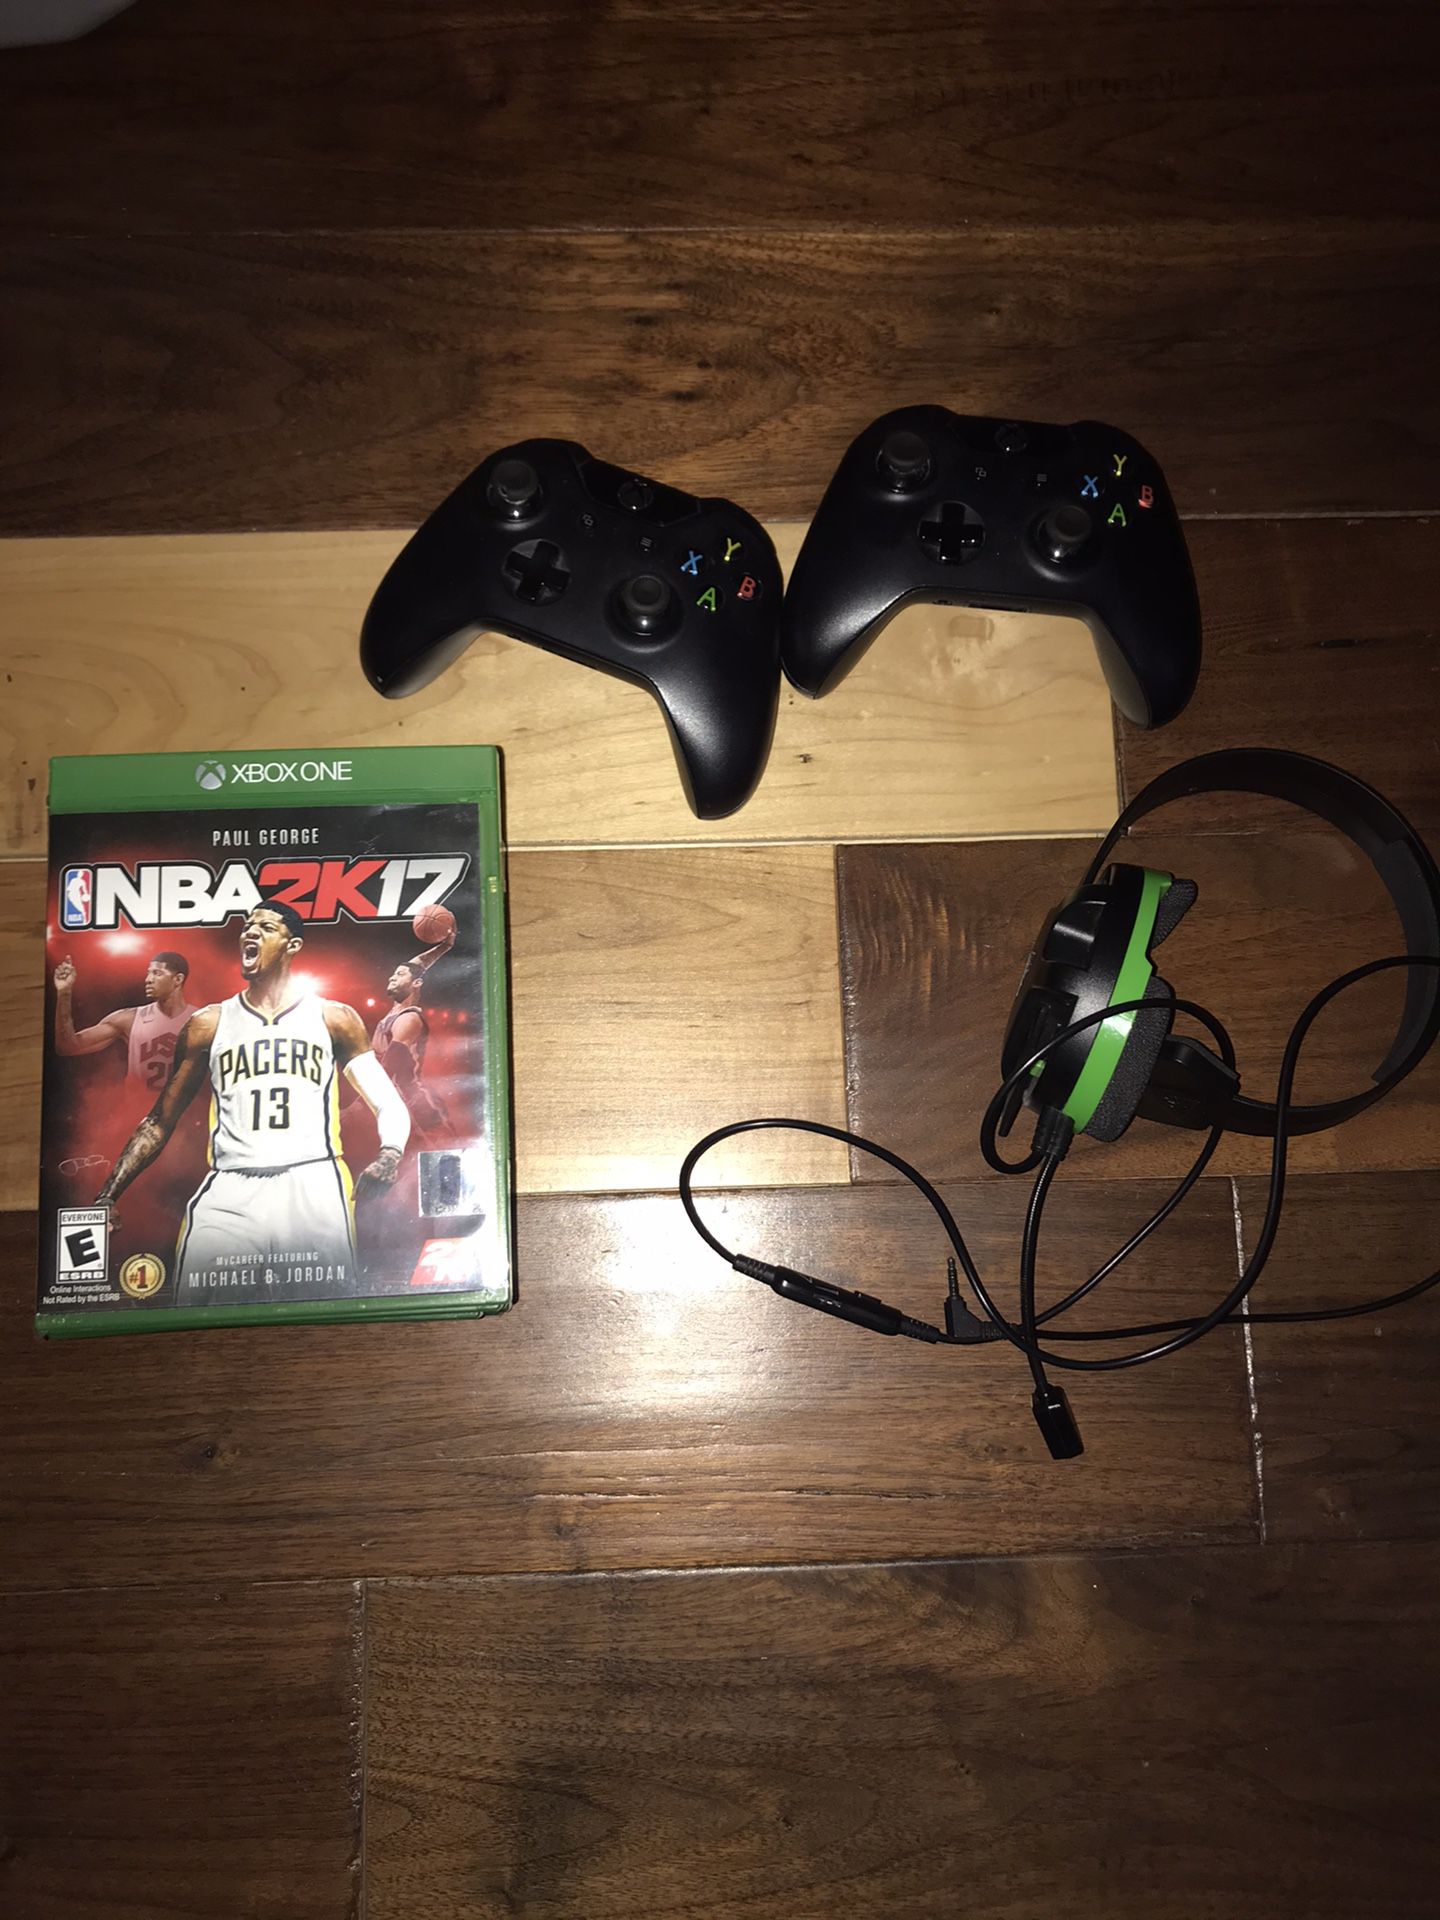 Xbox games, controllers and headset